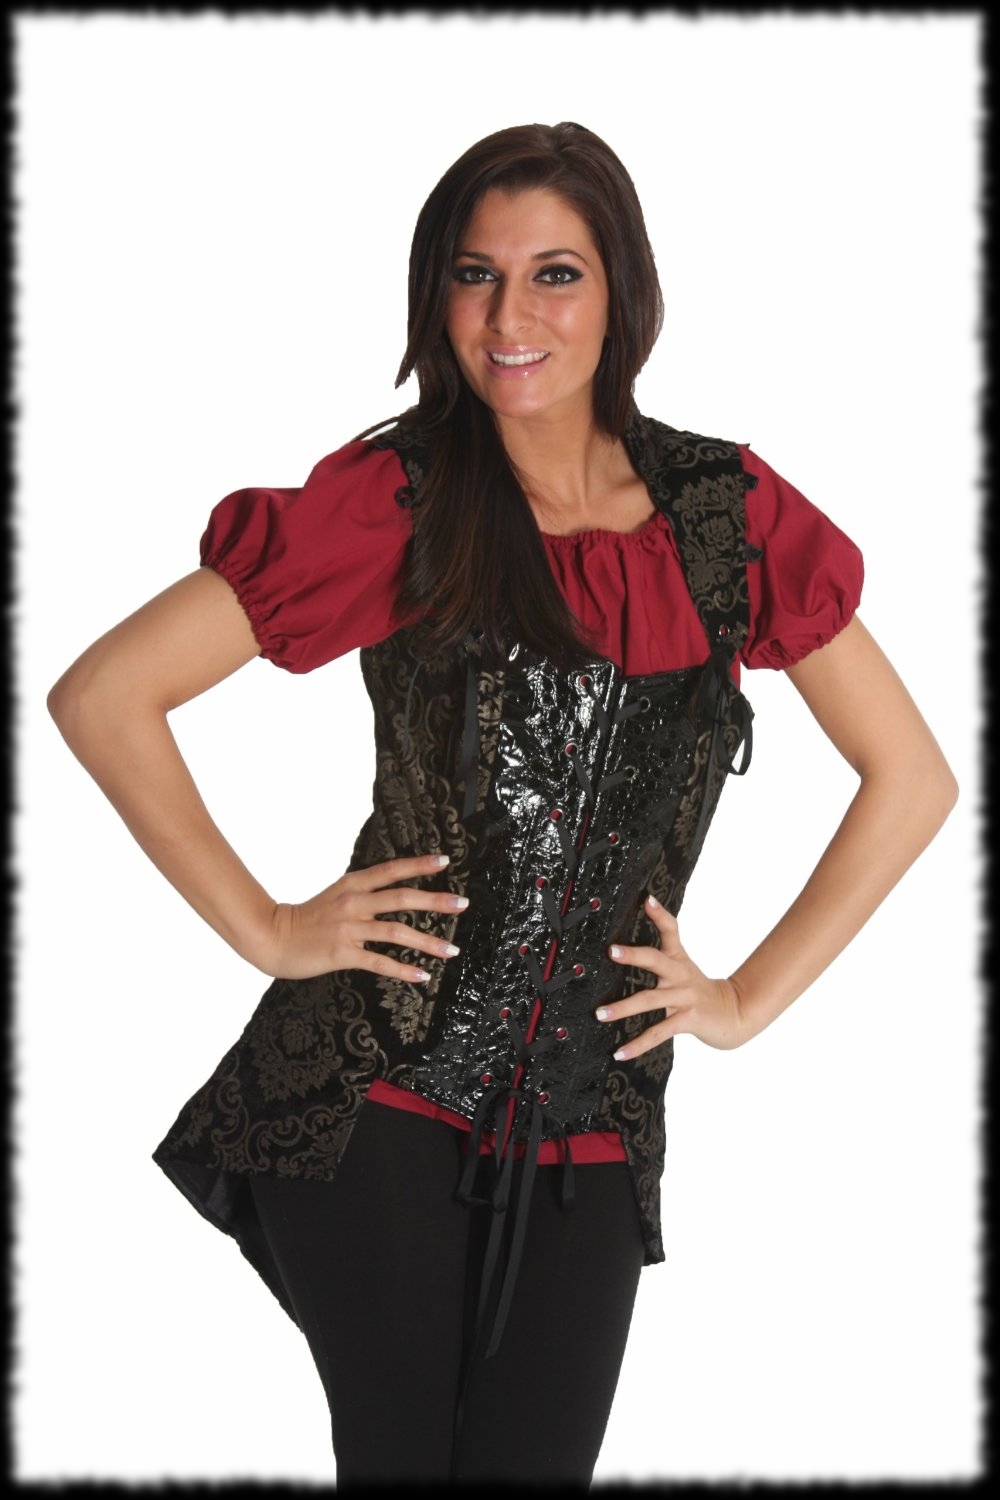 Halloween Costume Ideas Deluxe Lady Pirate Costume Corset with Removable Sleaves